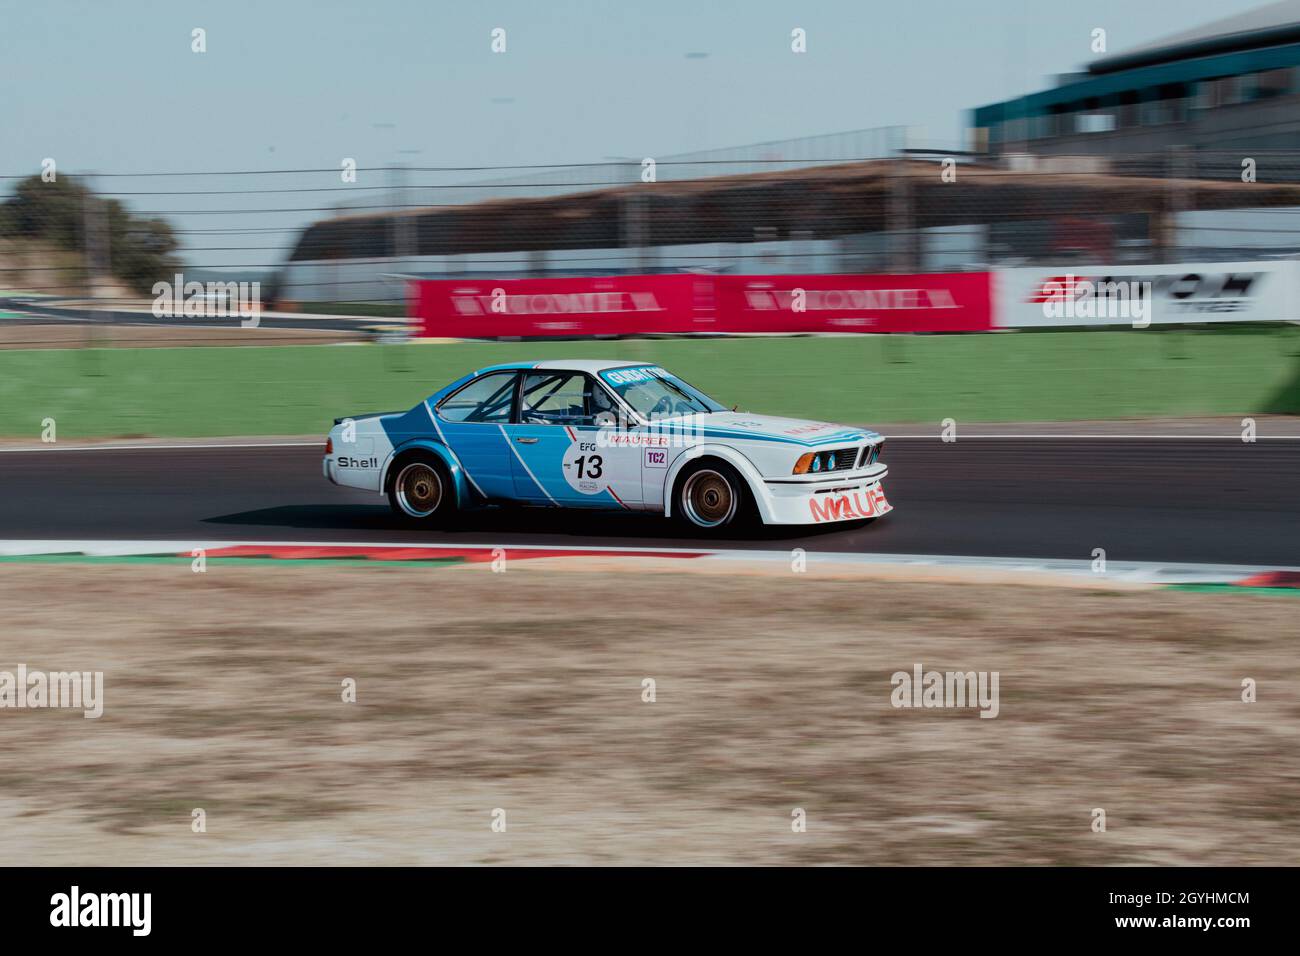 Italy, september 11 2021. Vallelunga classic. 70s vintage car racing blurred motion background of BMW 635CSI on asphalt racetrack Stock Photo